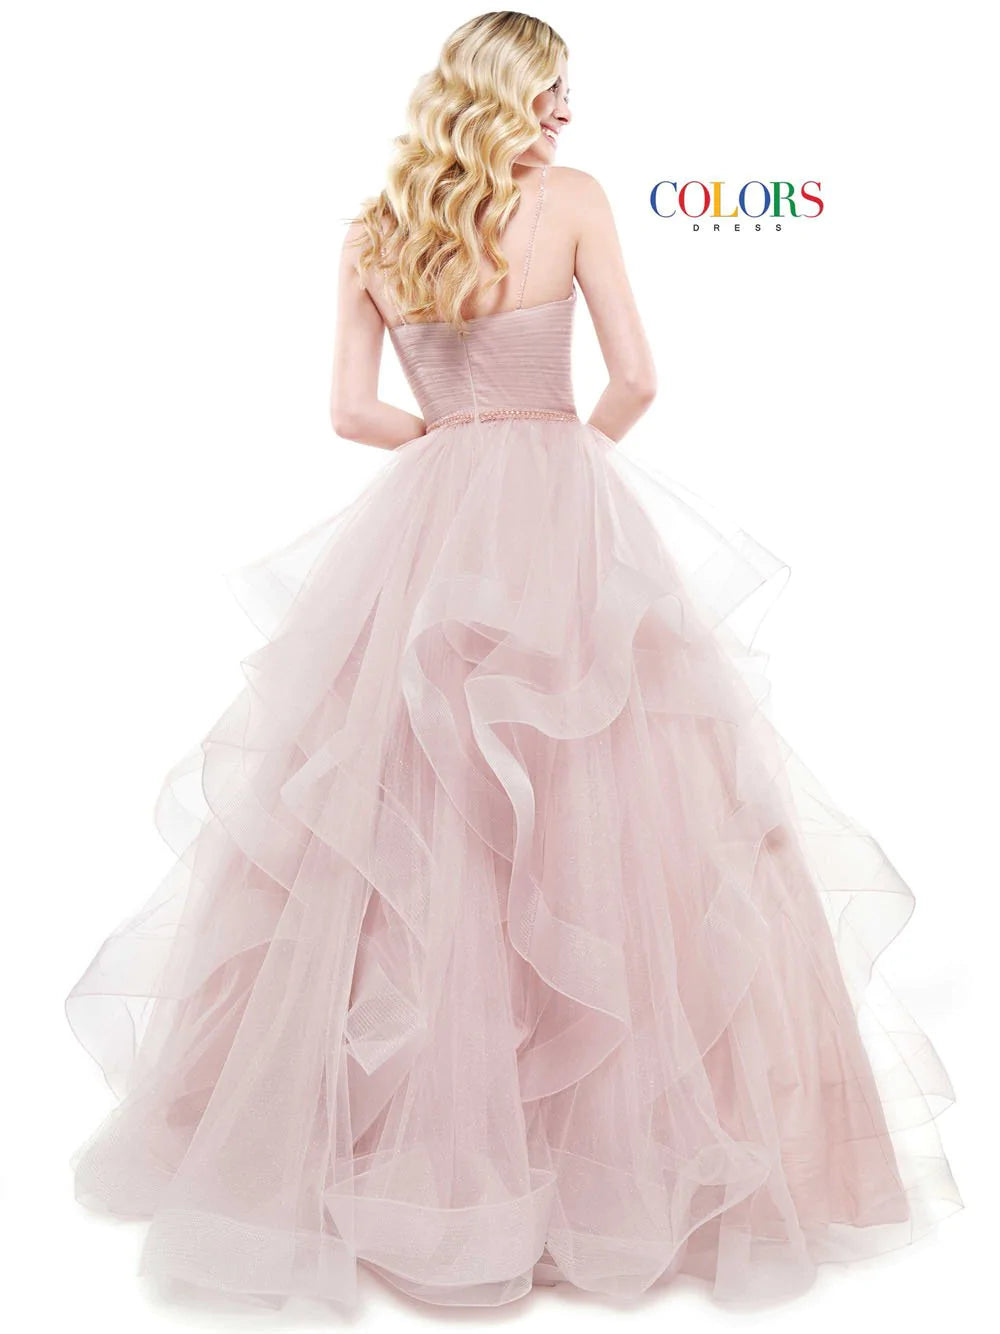 Colors Dress 2381 Prom Dress Ballgown V Neckline Layered Glitter Tulle Pageant Gown